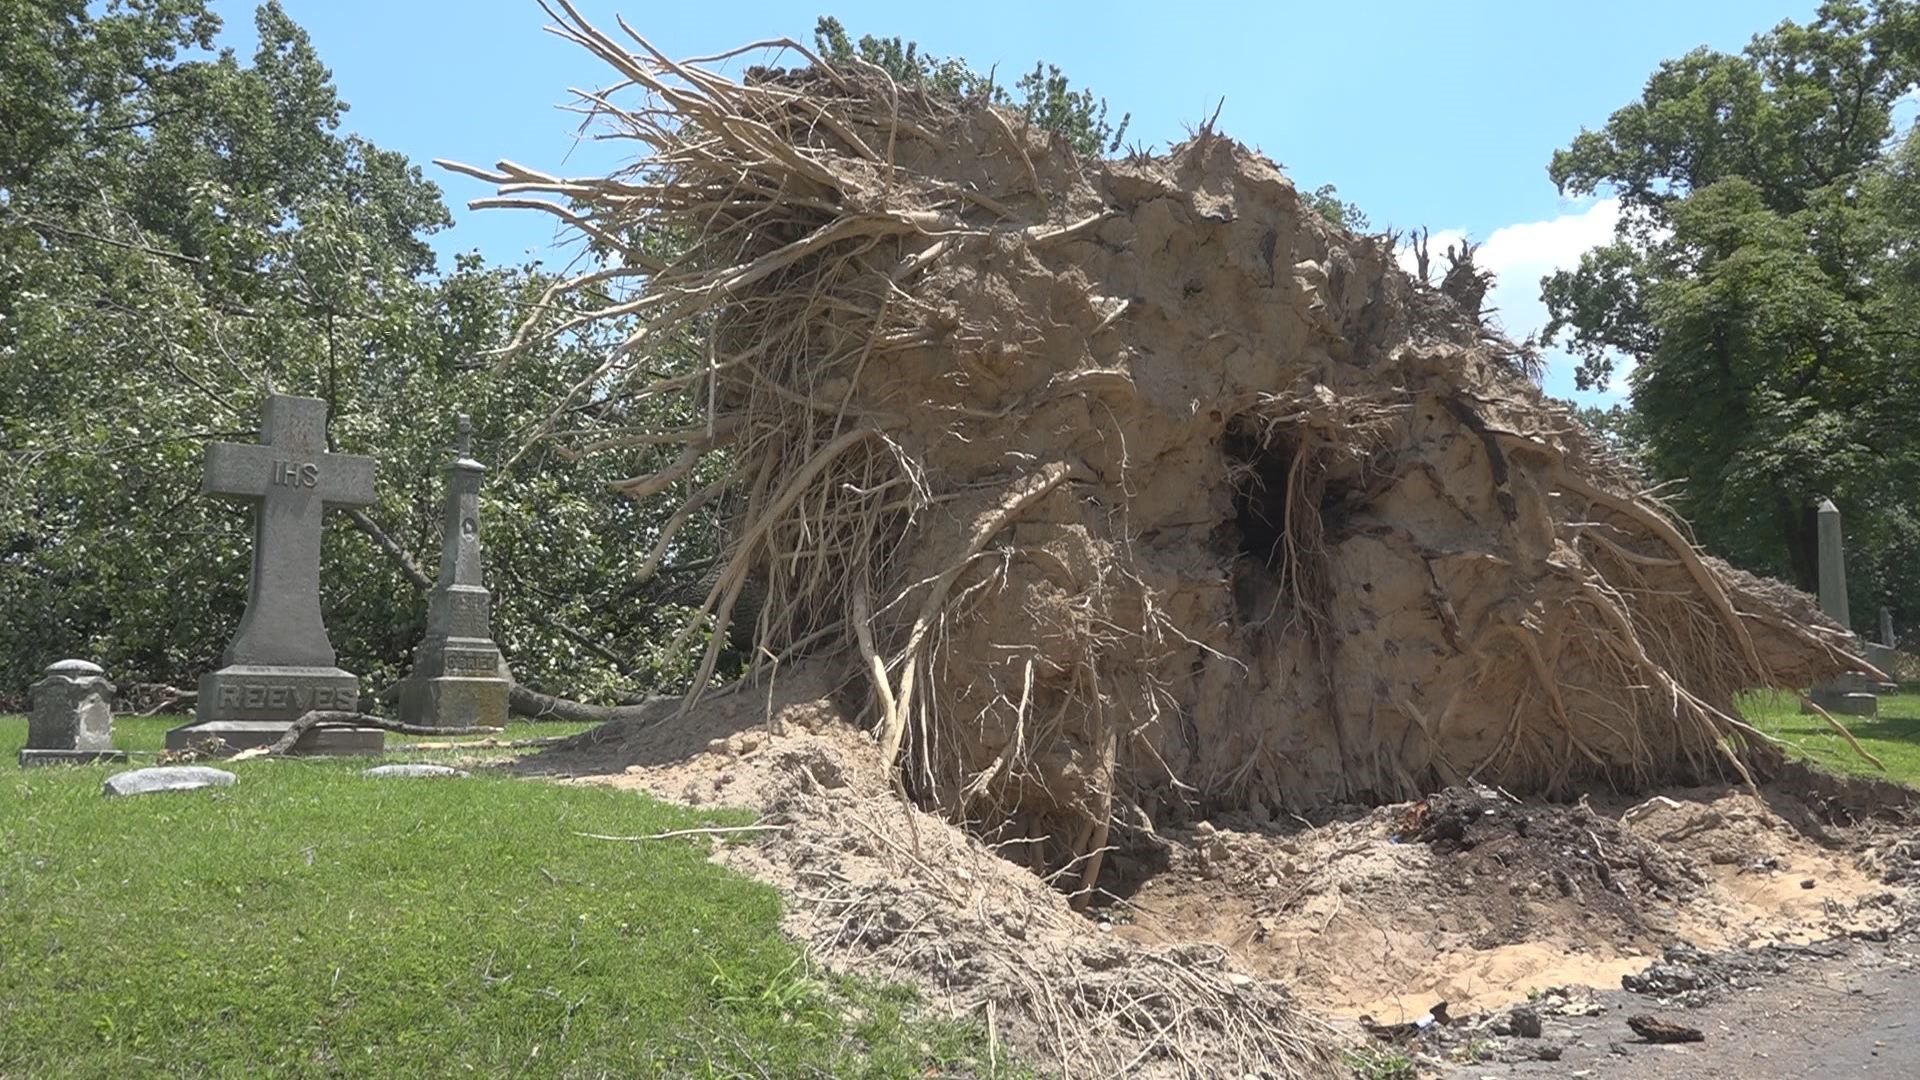 Nine days ago, storms devastated the St. Louis area. Cleanup continues at two of the area's largest cemeteries.